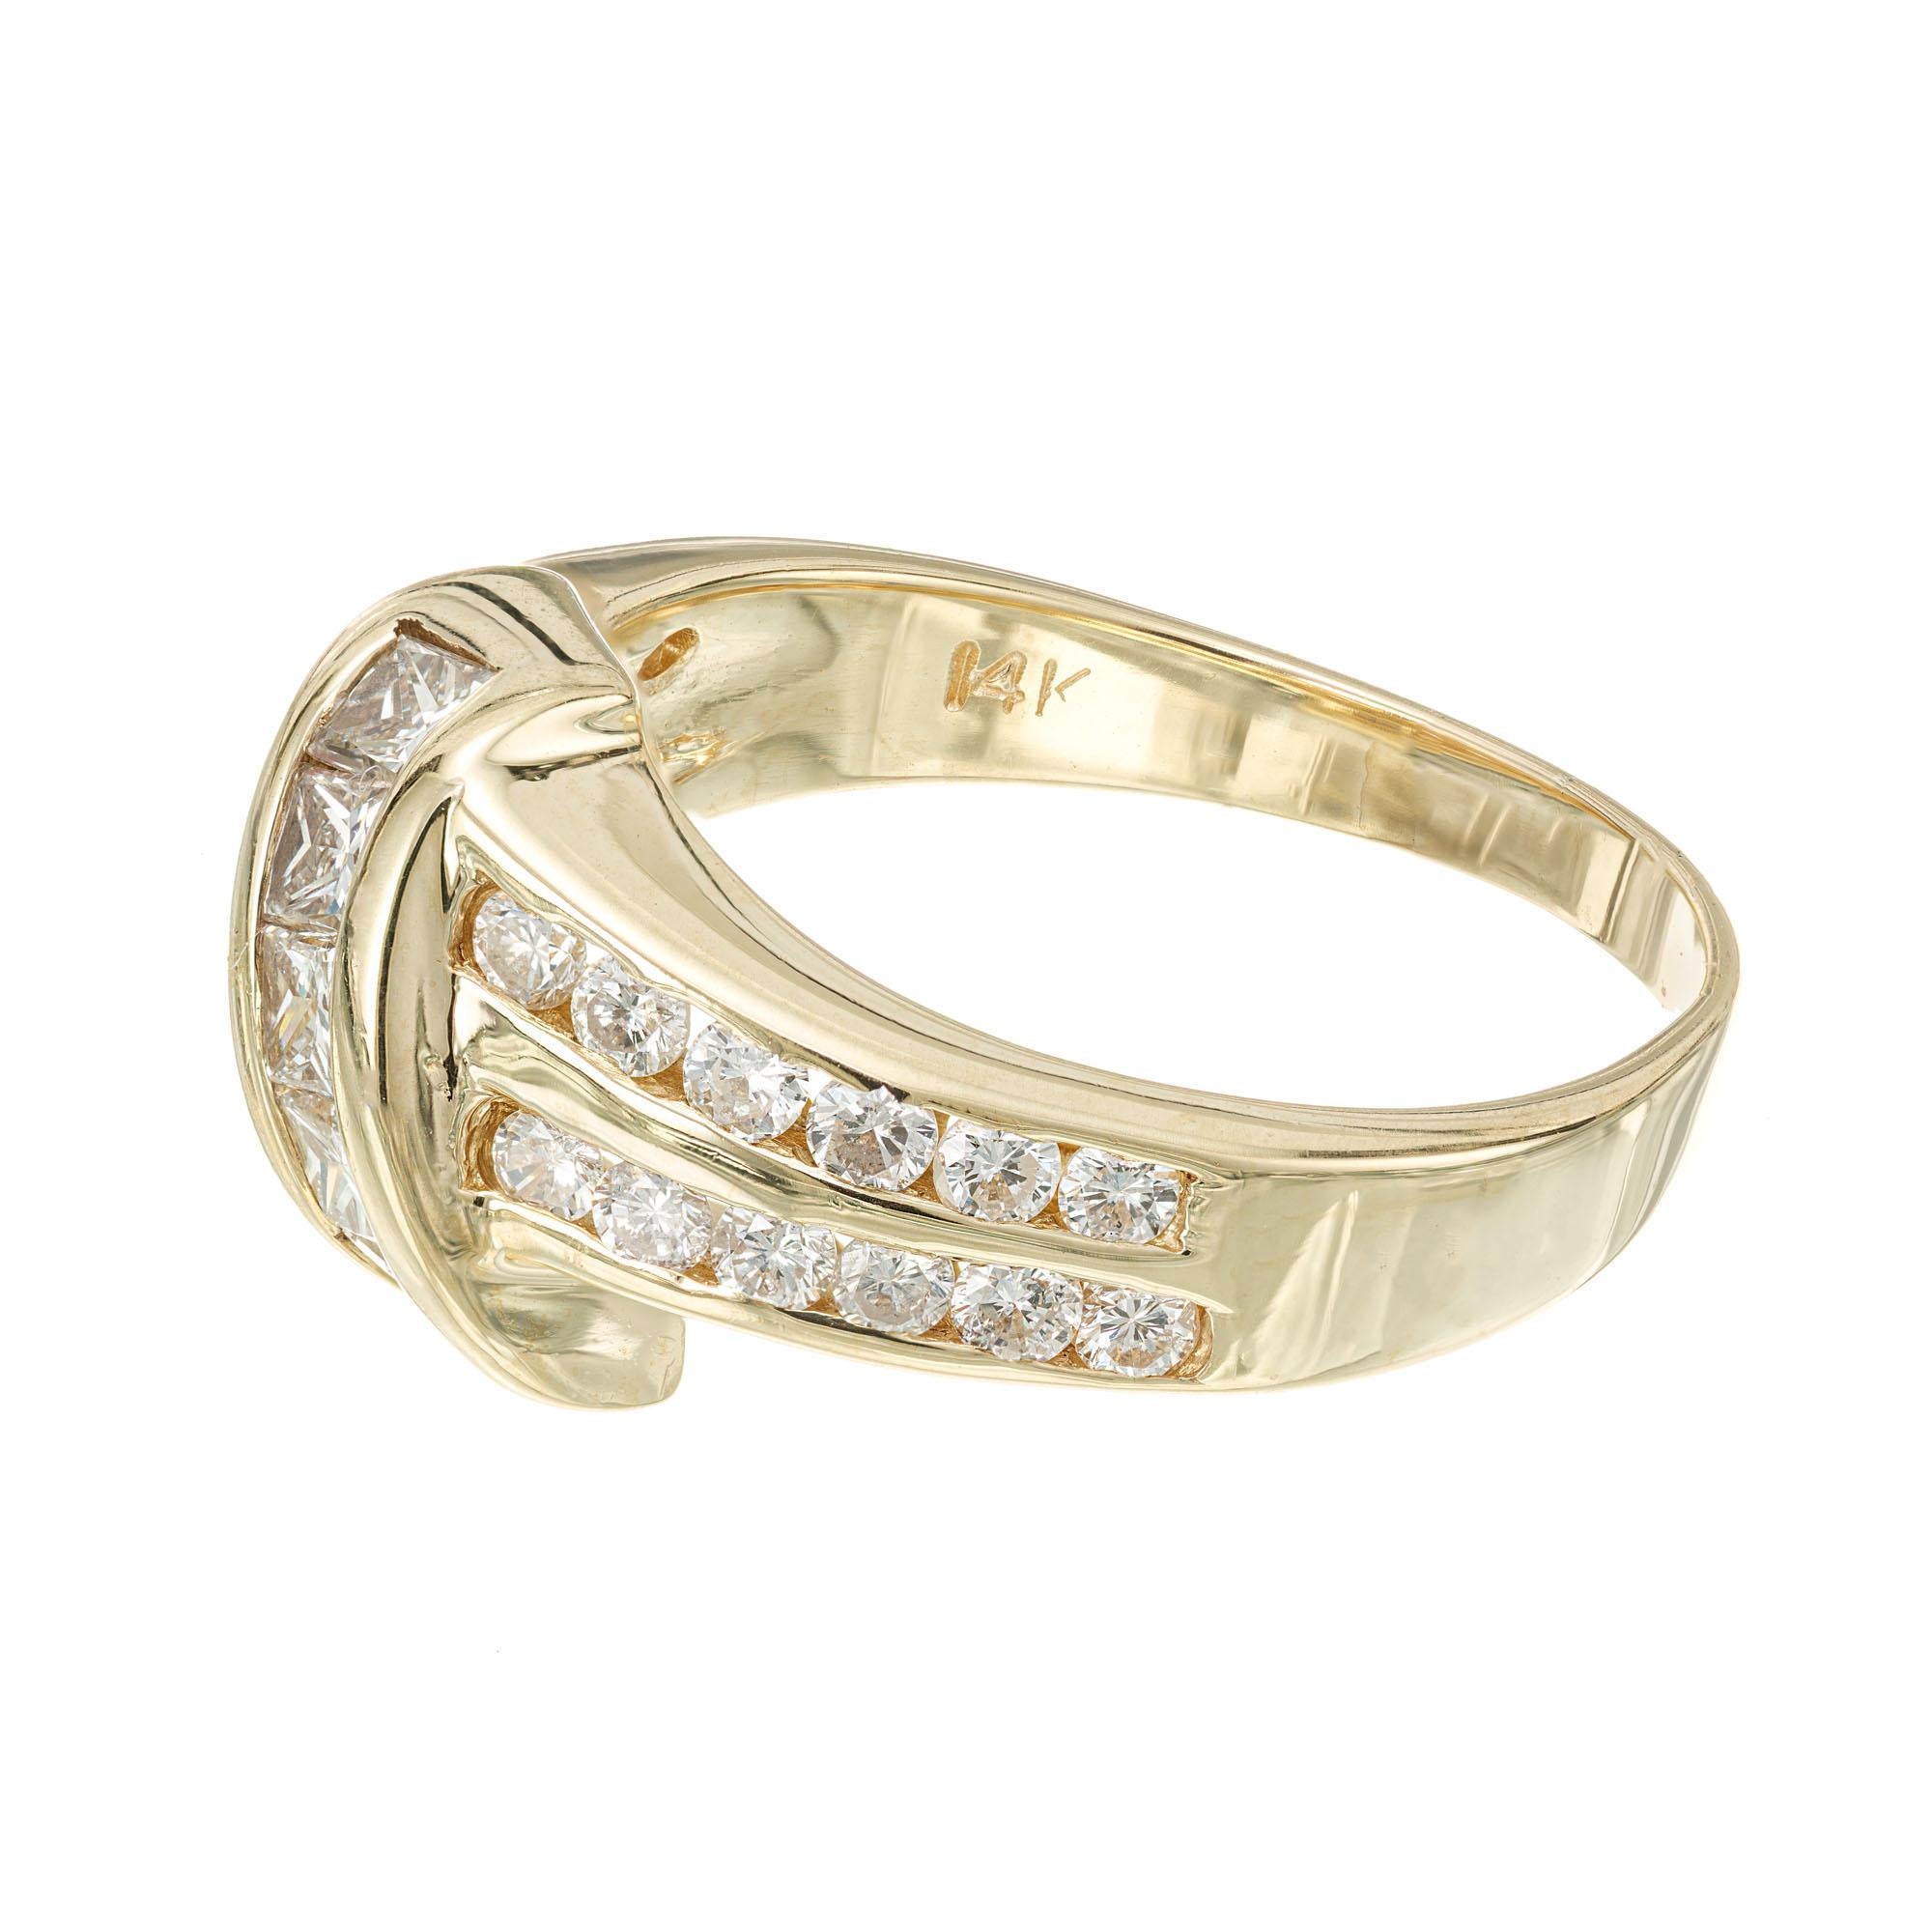 1.08 Carat Diamond Yellow Gold Cross Over Ring In Good Condition For Sale In Stamford, CT